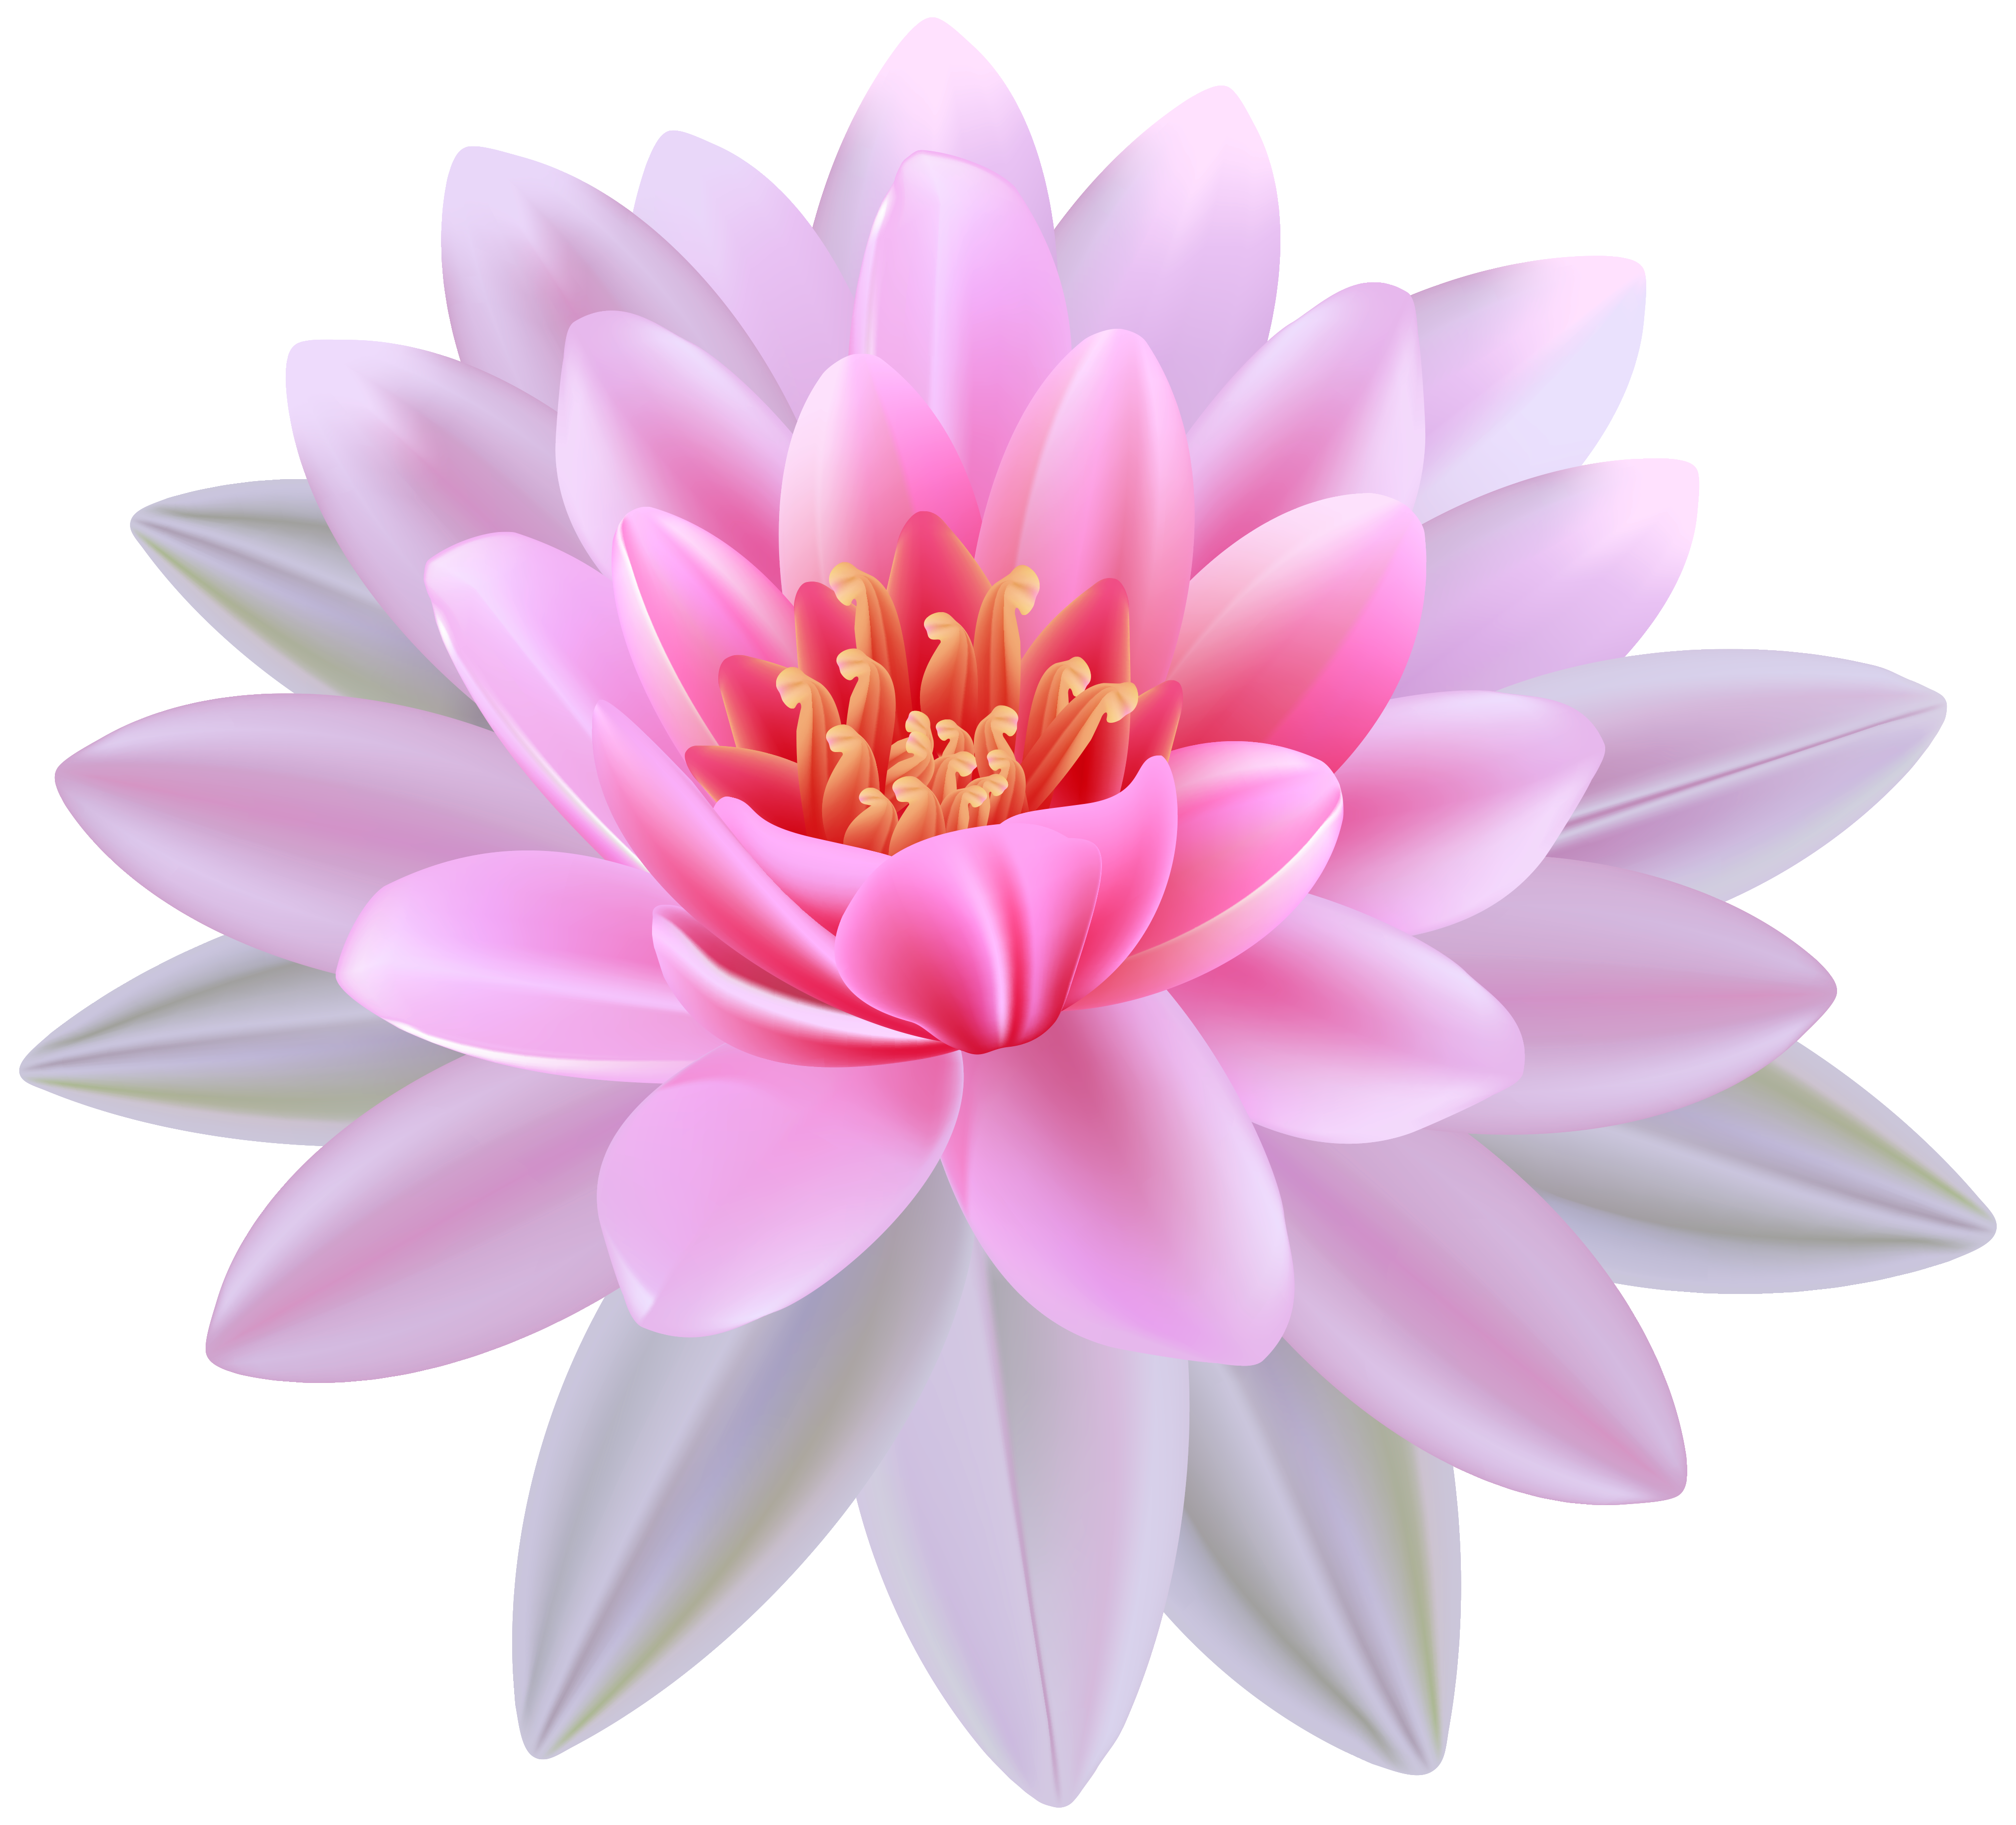 Pink Water Lily Flower Clip Art.